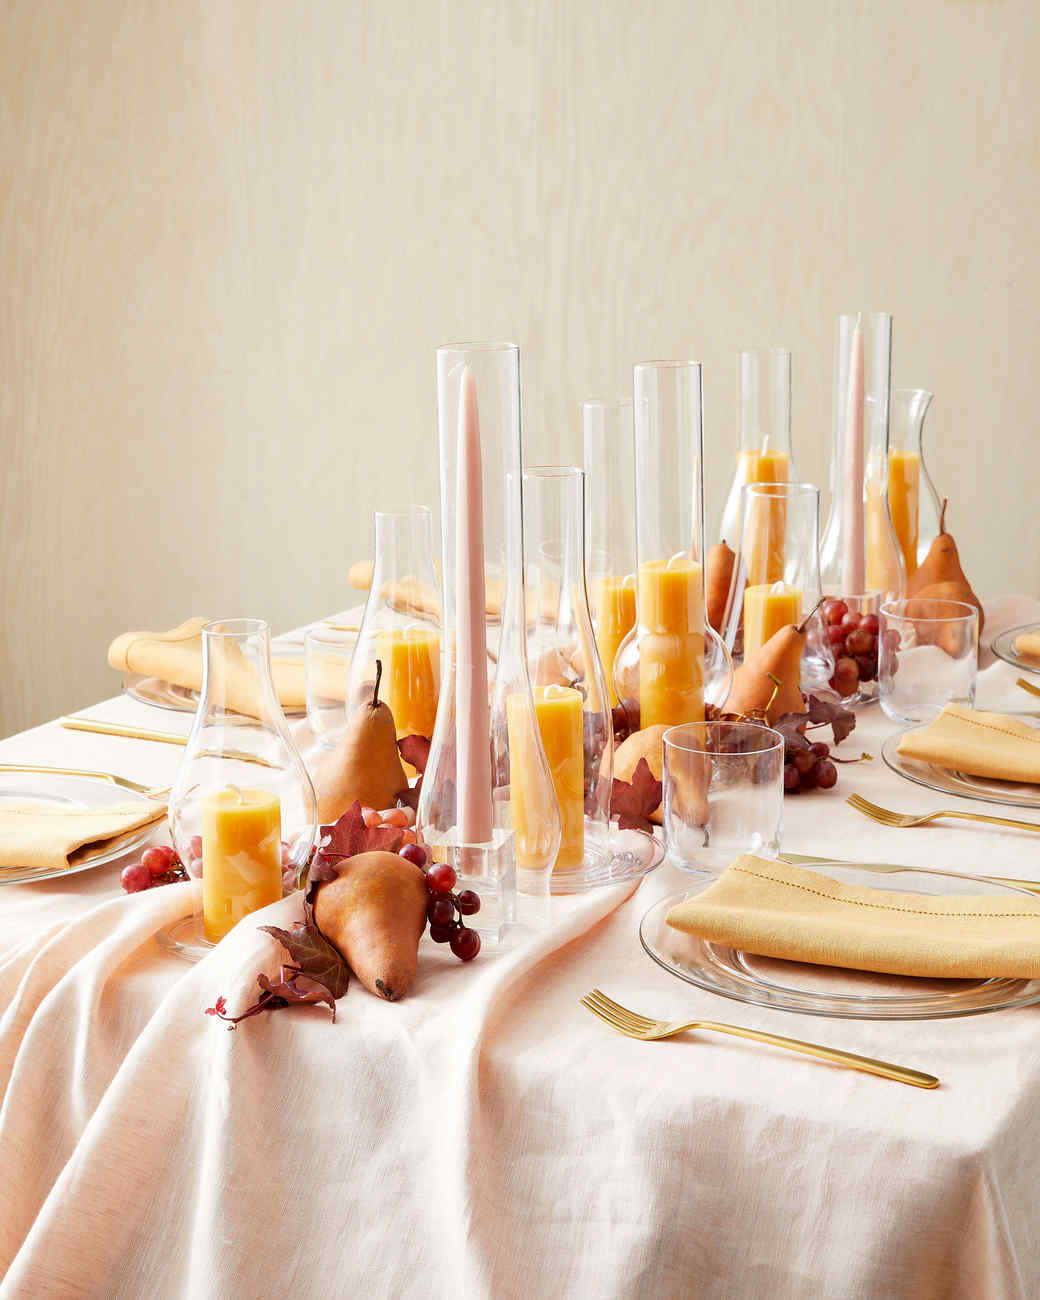 15 Passover Entertaining Ideas for the Whole Family | Martha Stewart